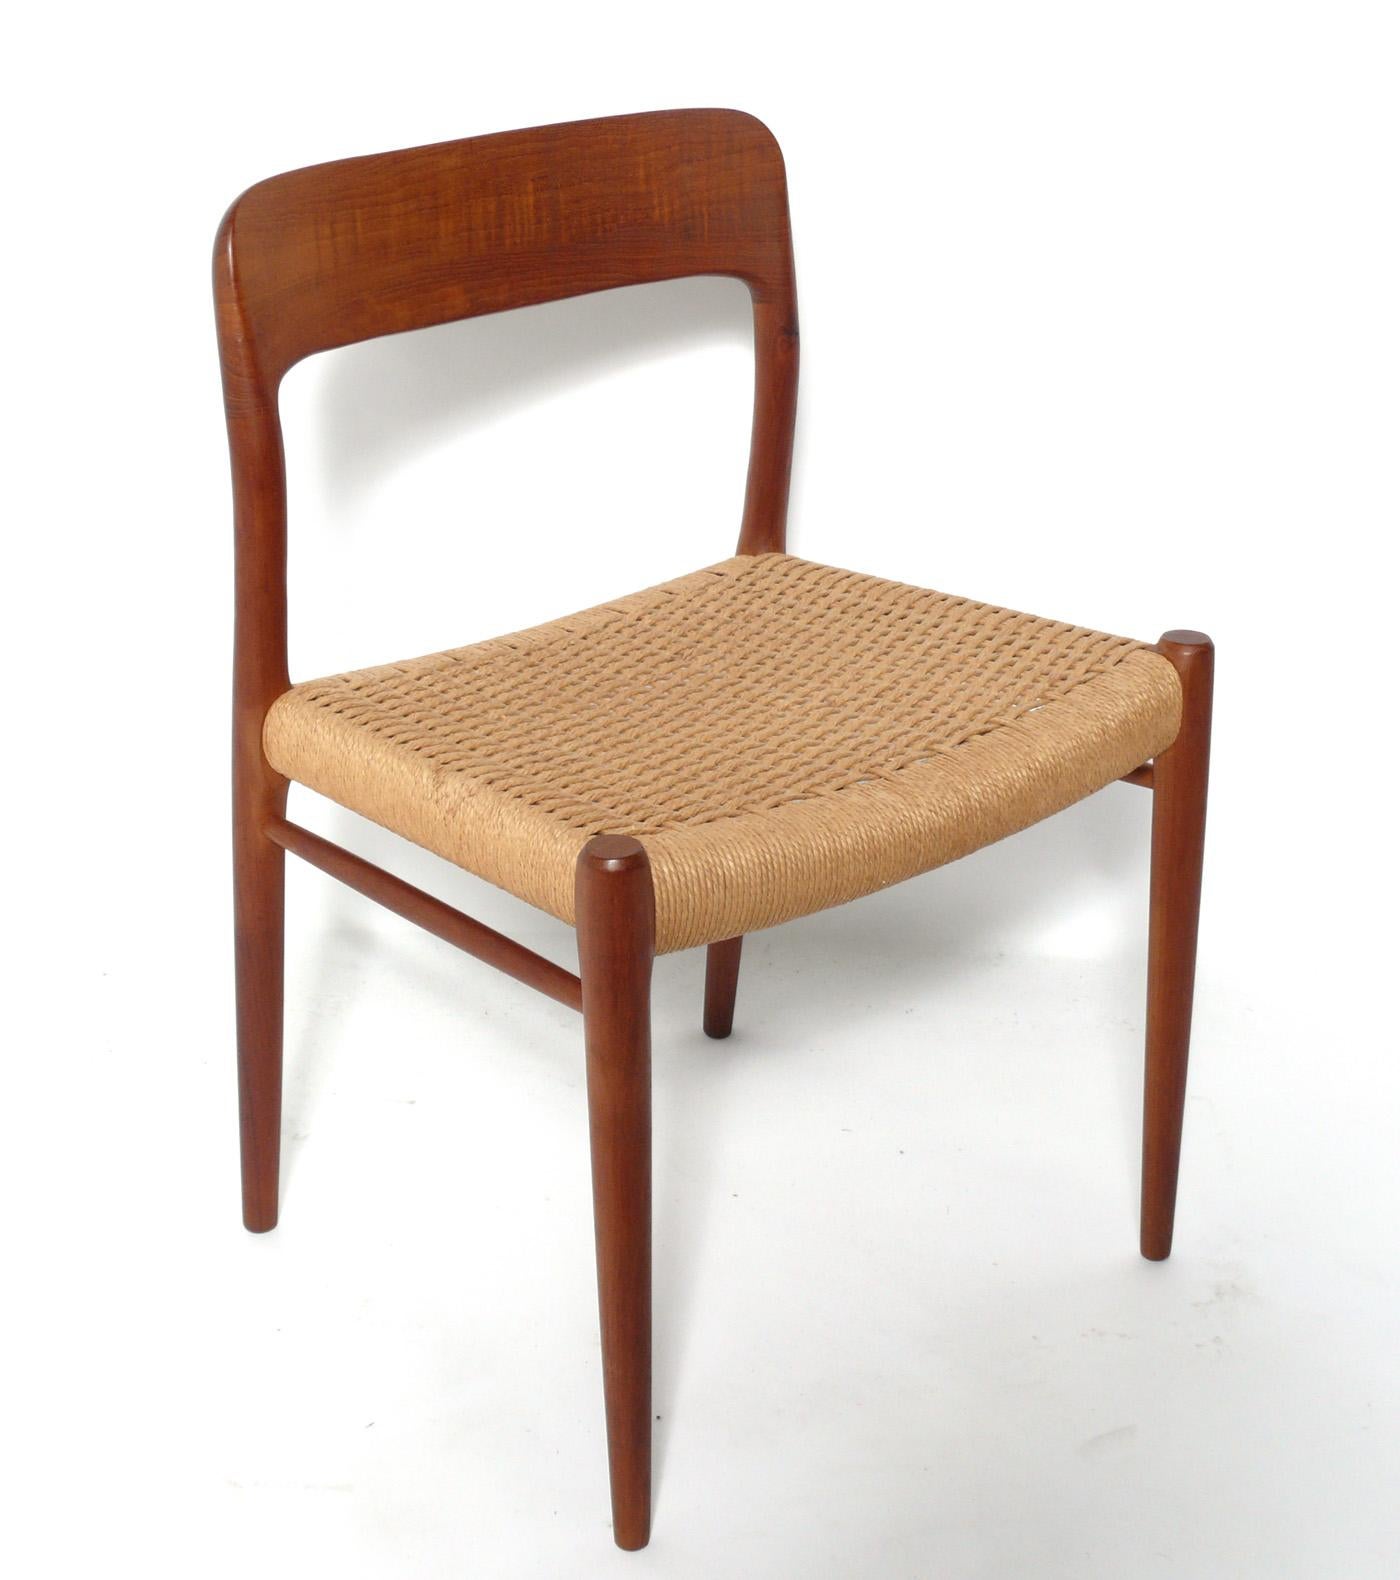 Set of four Danish modern dining chairs, designed by Niels Moller, Denmark, circa 1960s. The teak frames have been cleaned and Danish oiled, and the woven rope seats retain their warm original patina. The price noted is for the set of four chairs.